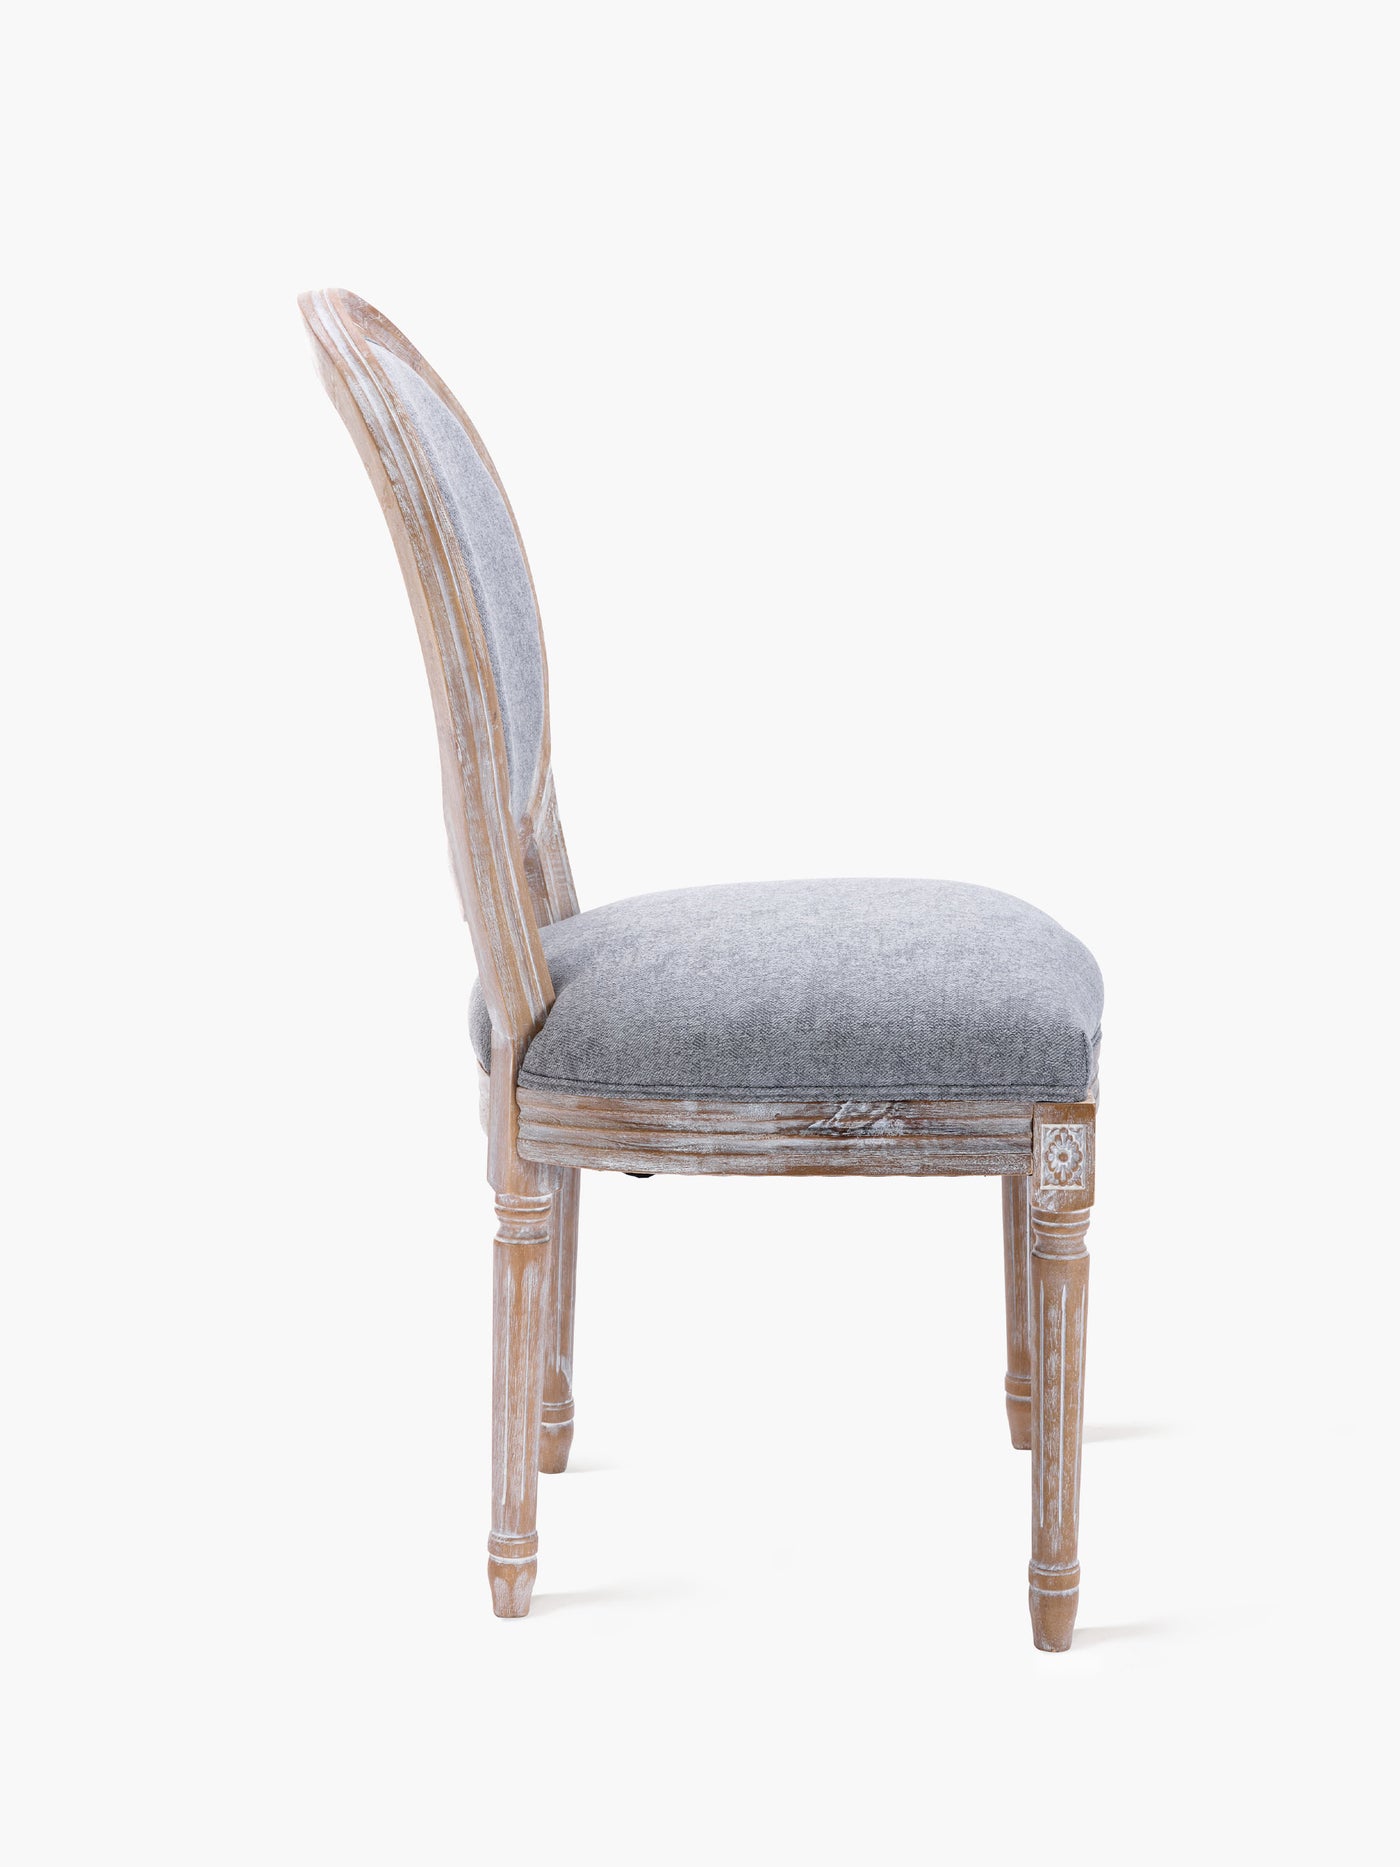 COLAMY Upholstered Vintage Farmhouse Chair with Rattan Back in Gray #color_gray